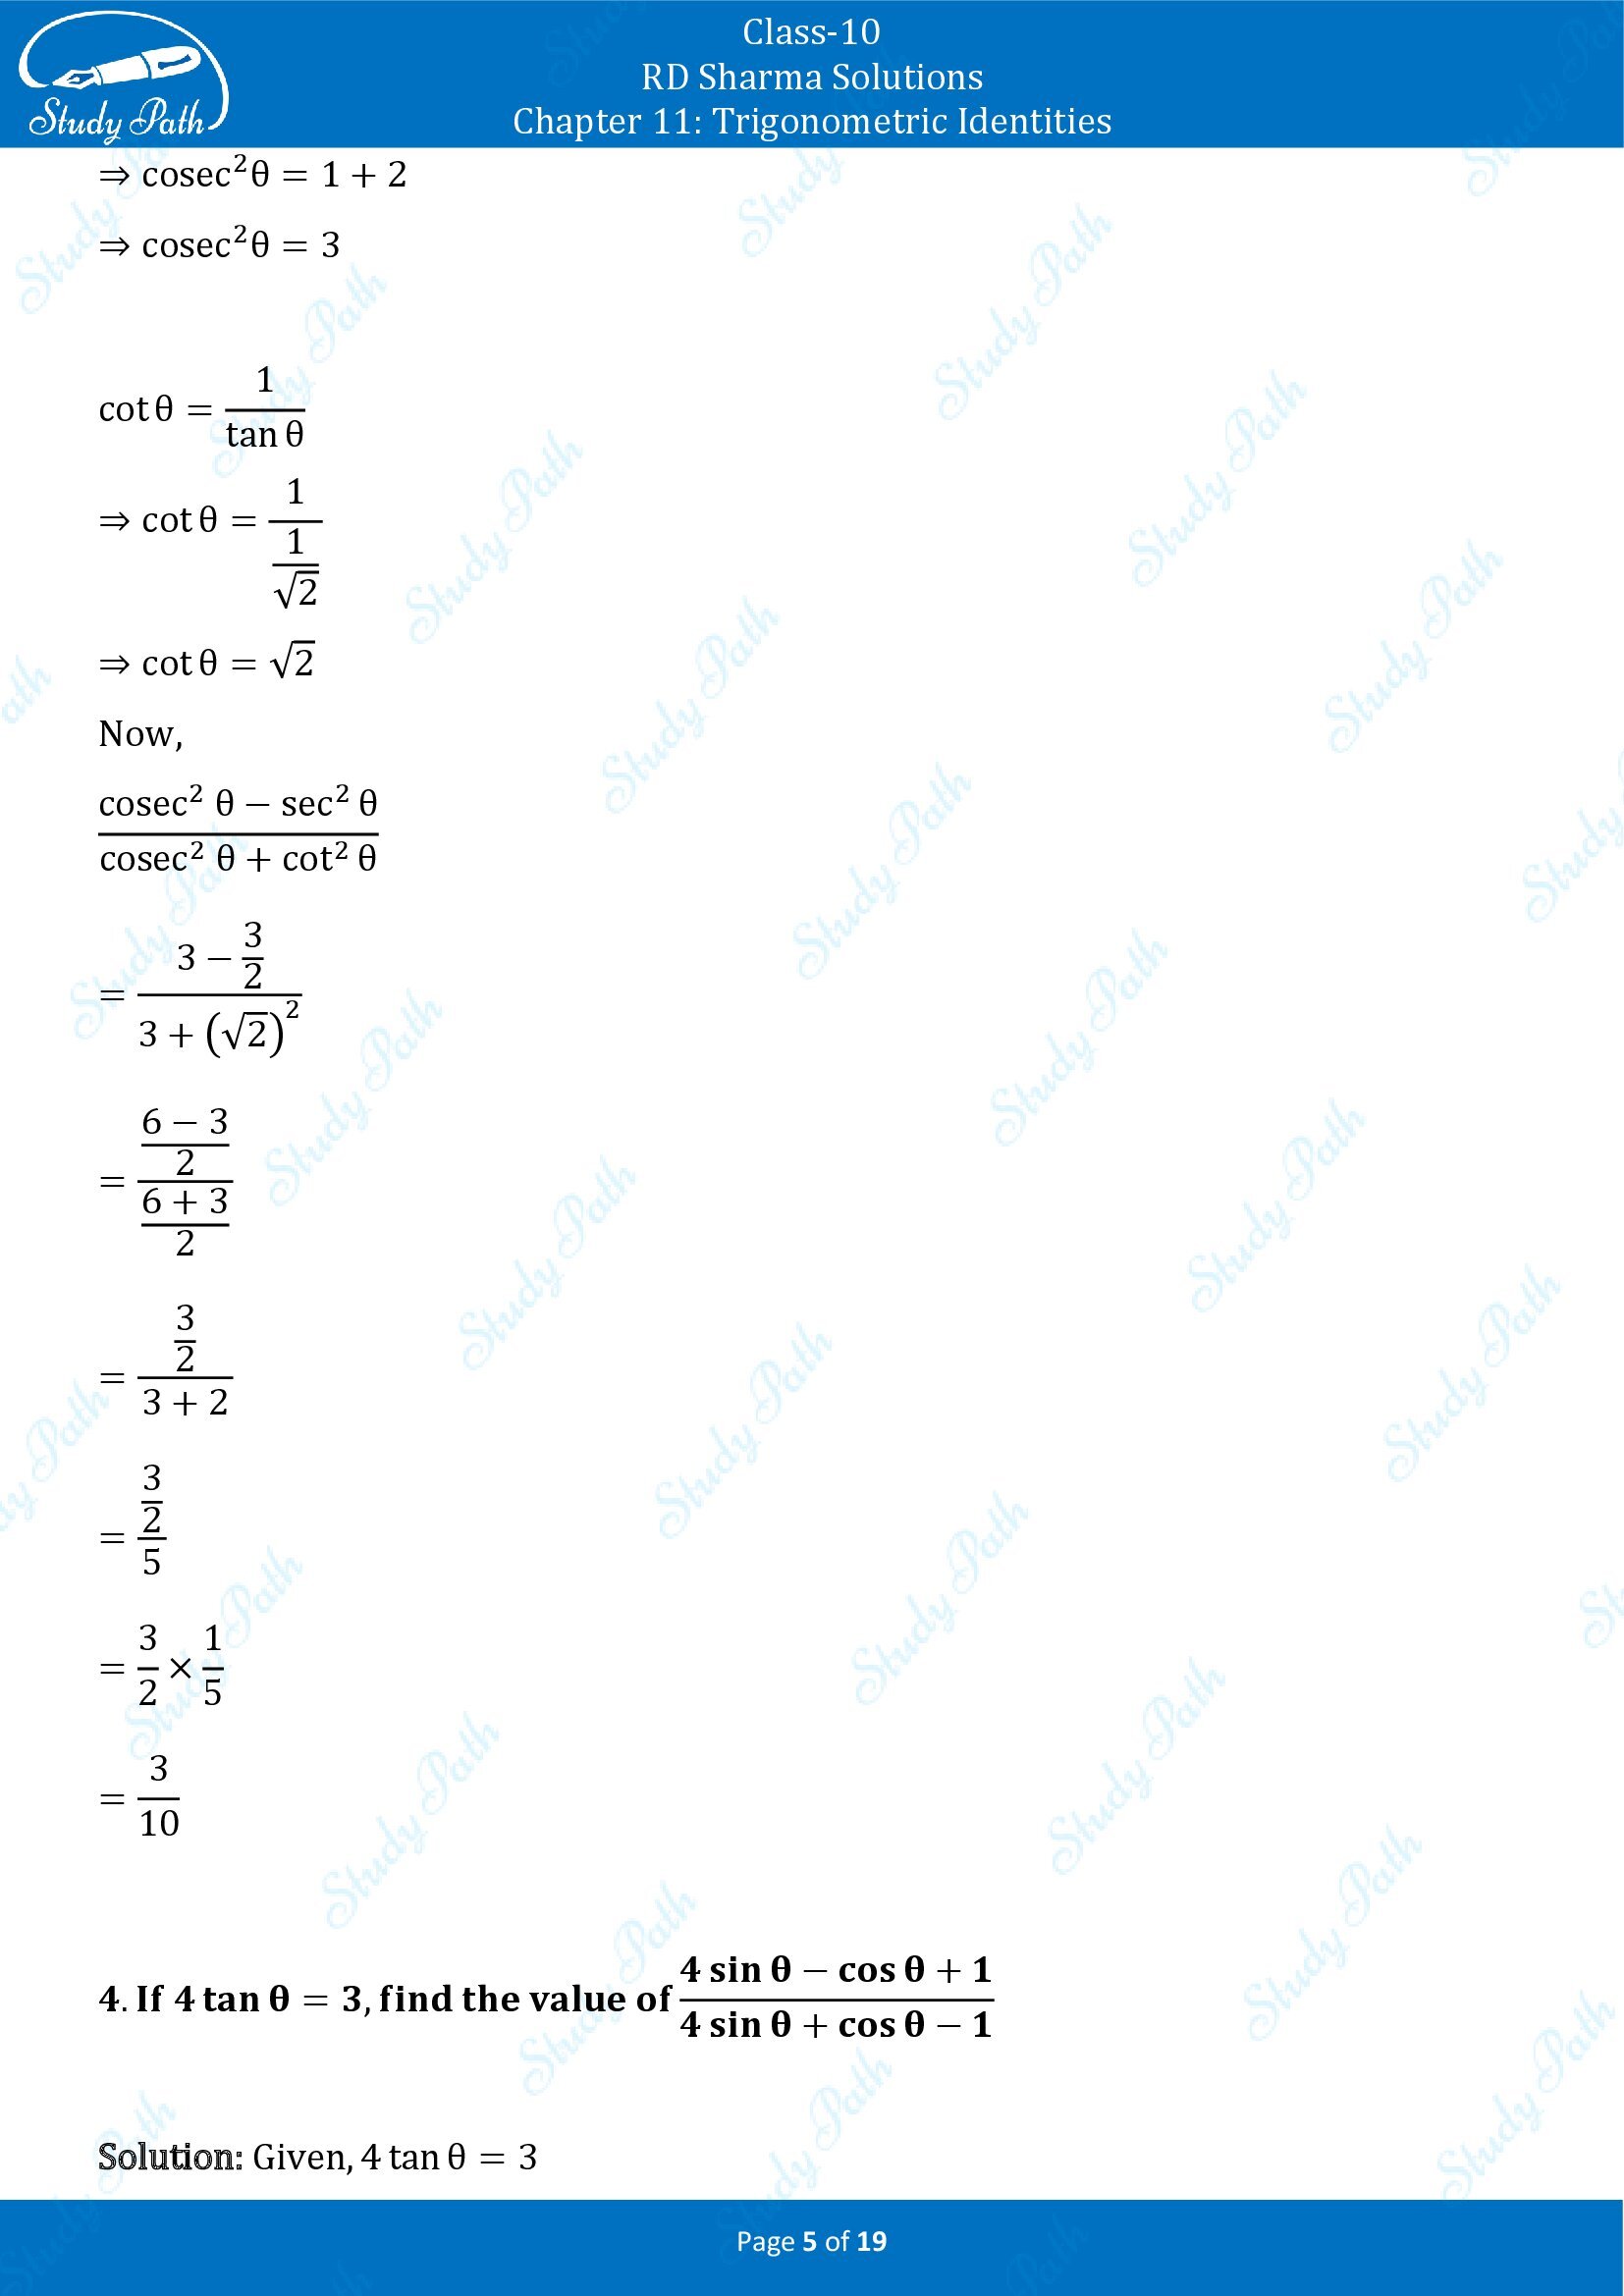 RD Sharma Solutions Class 10 Chapter 11 Trigonometric Identities Exercise 11.2 00005